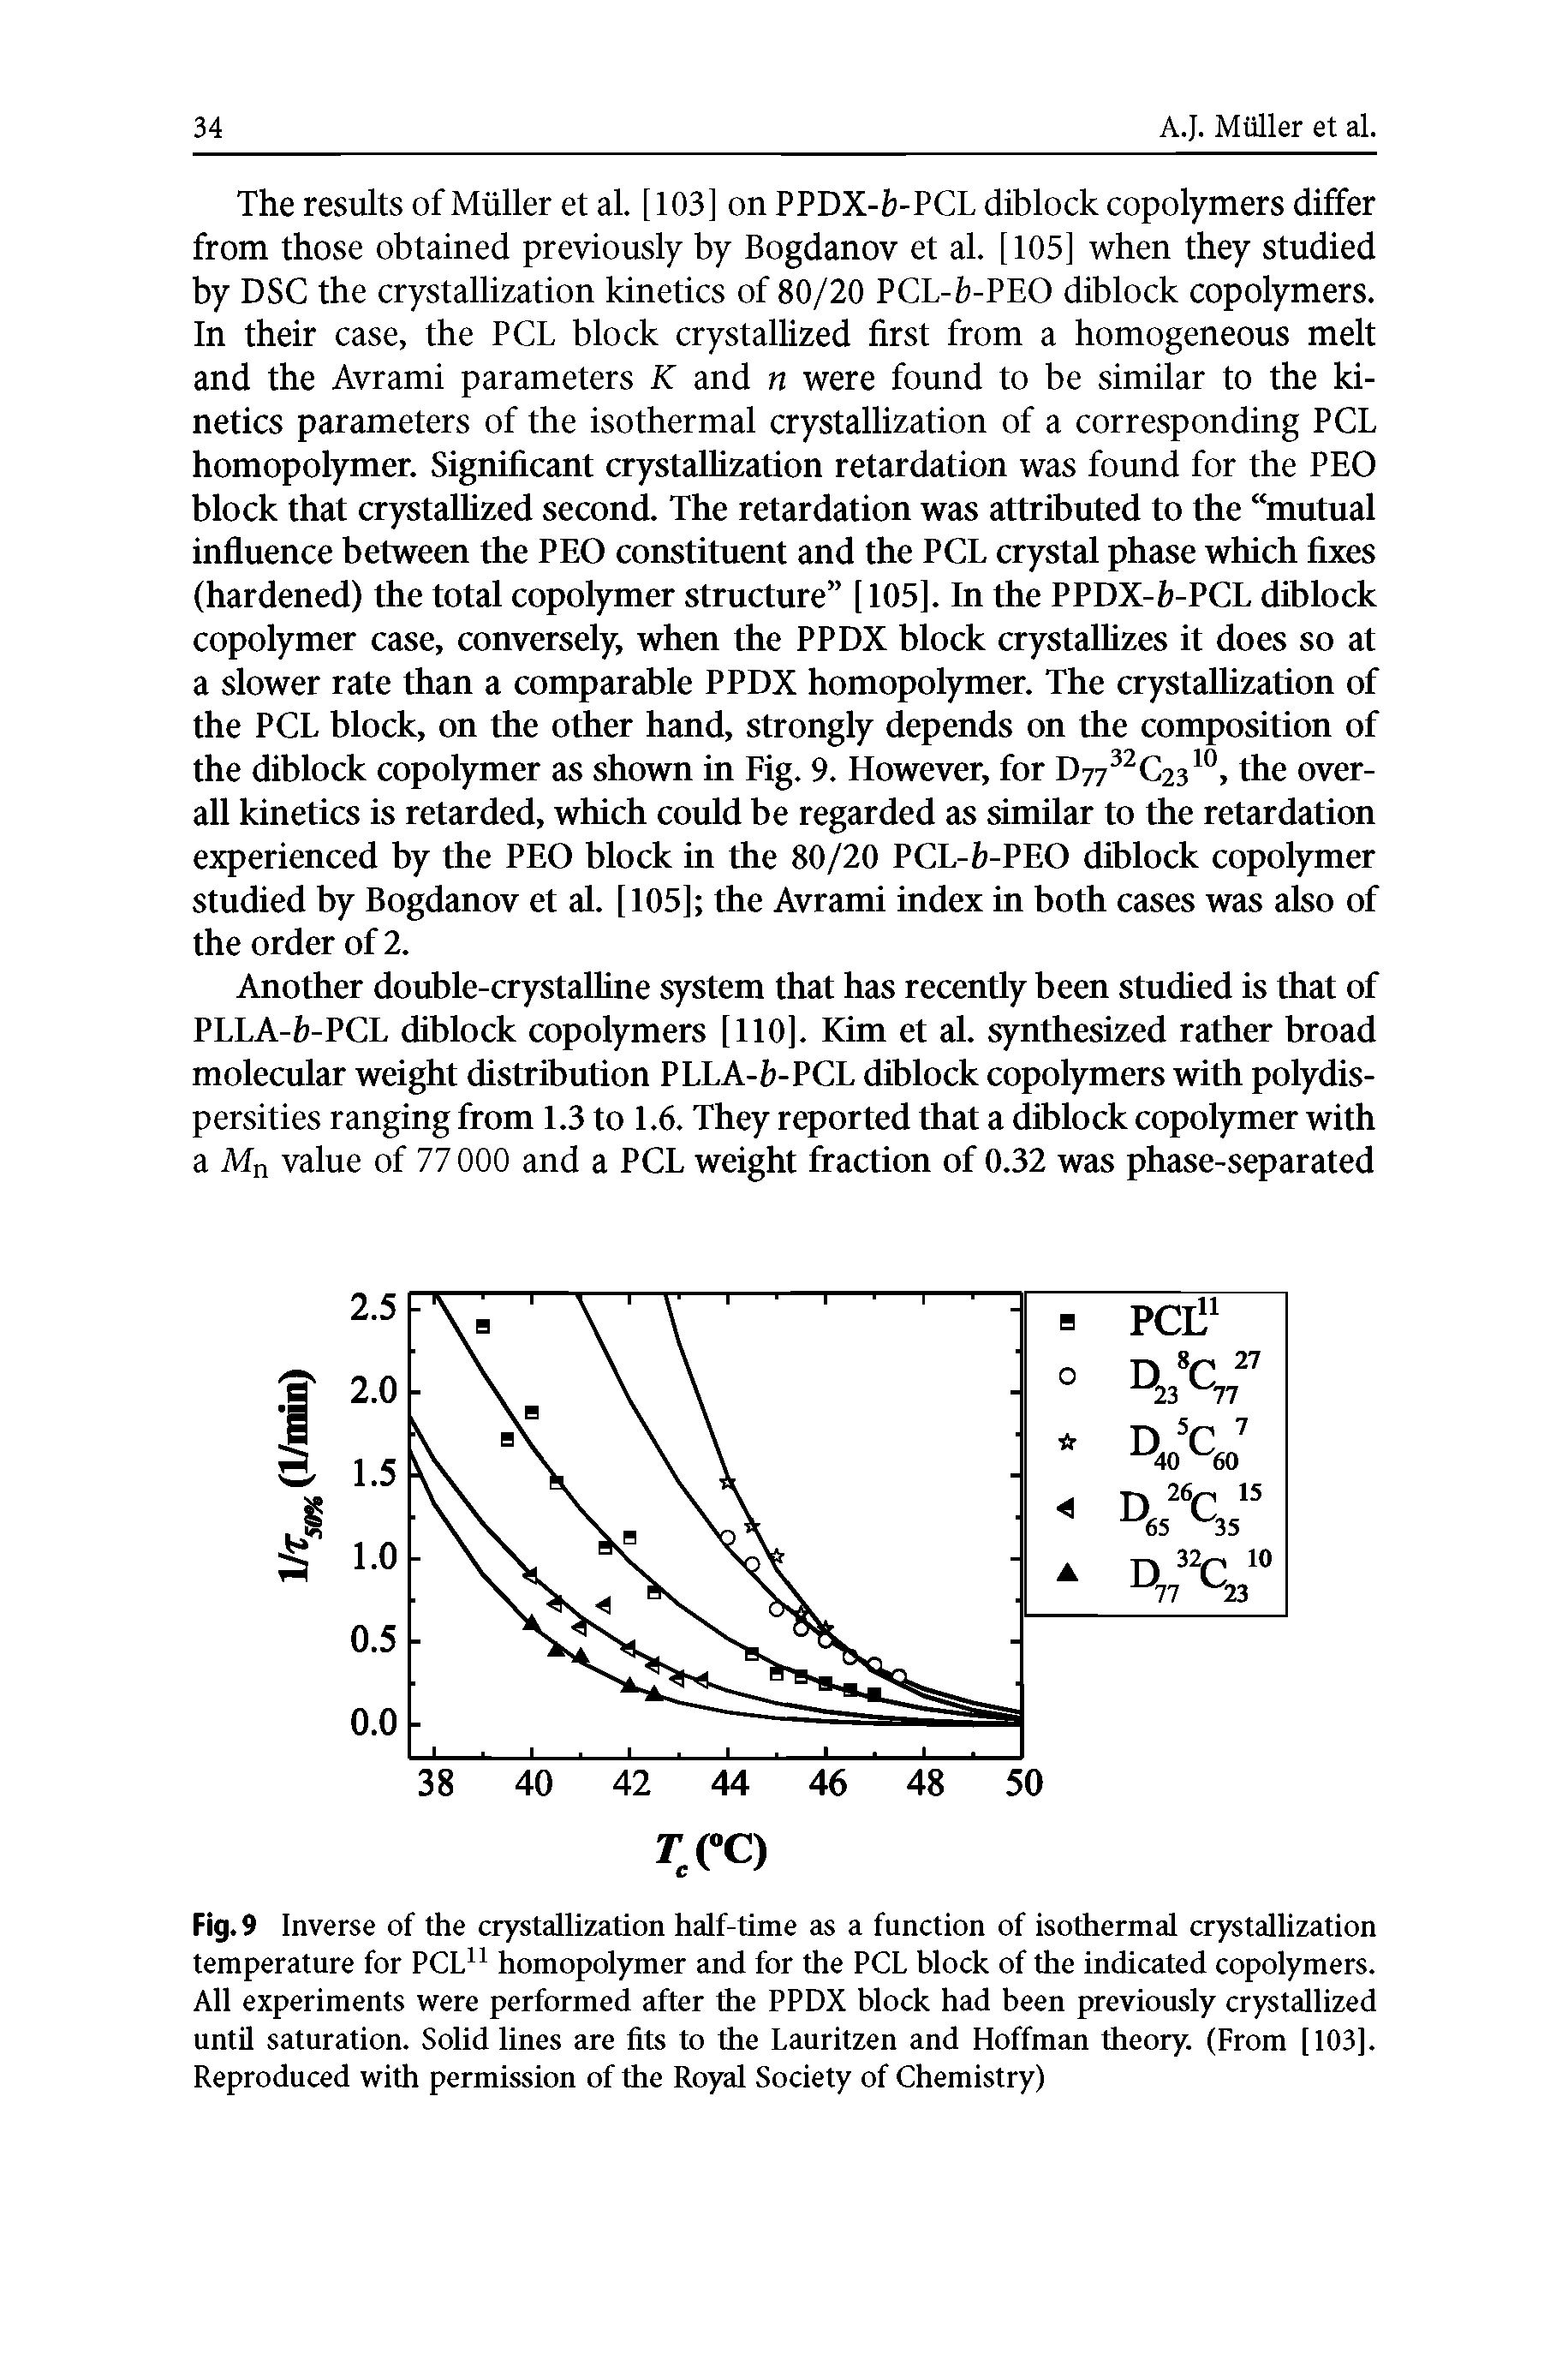 Fig. 9 Inverse of the crystallization half-time as a function of isothermal crystallization temperature for PCL11 homopolymer and for the PCL block of the indicated copolymers. All experiments were performed after the PPDX block had been previously crystallized until saturation. Solid lines are fits to the Lauritzen and Hoffman theory. (From [103]. Reproduced with permission of the Royal Society of Chemistry)...